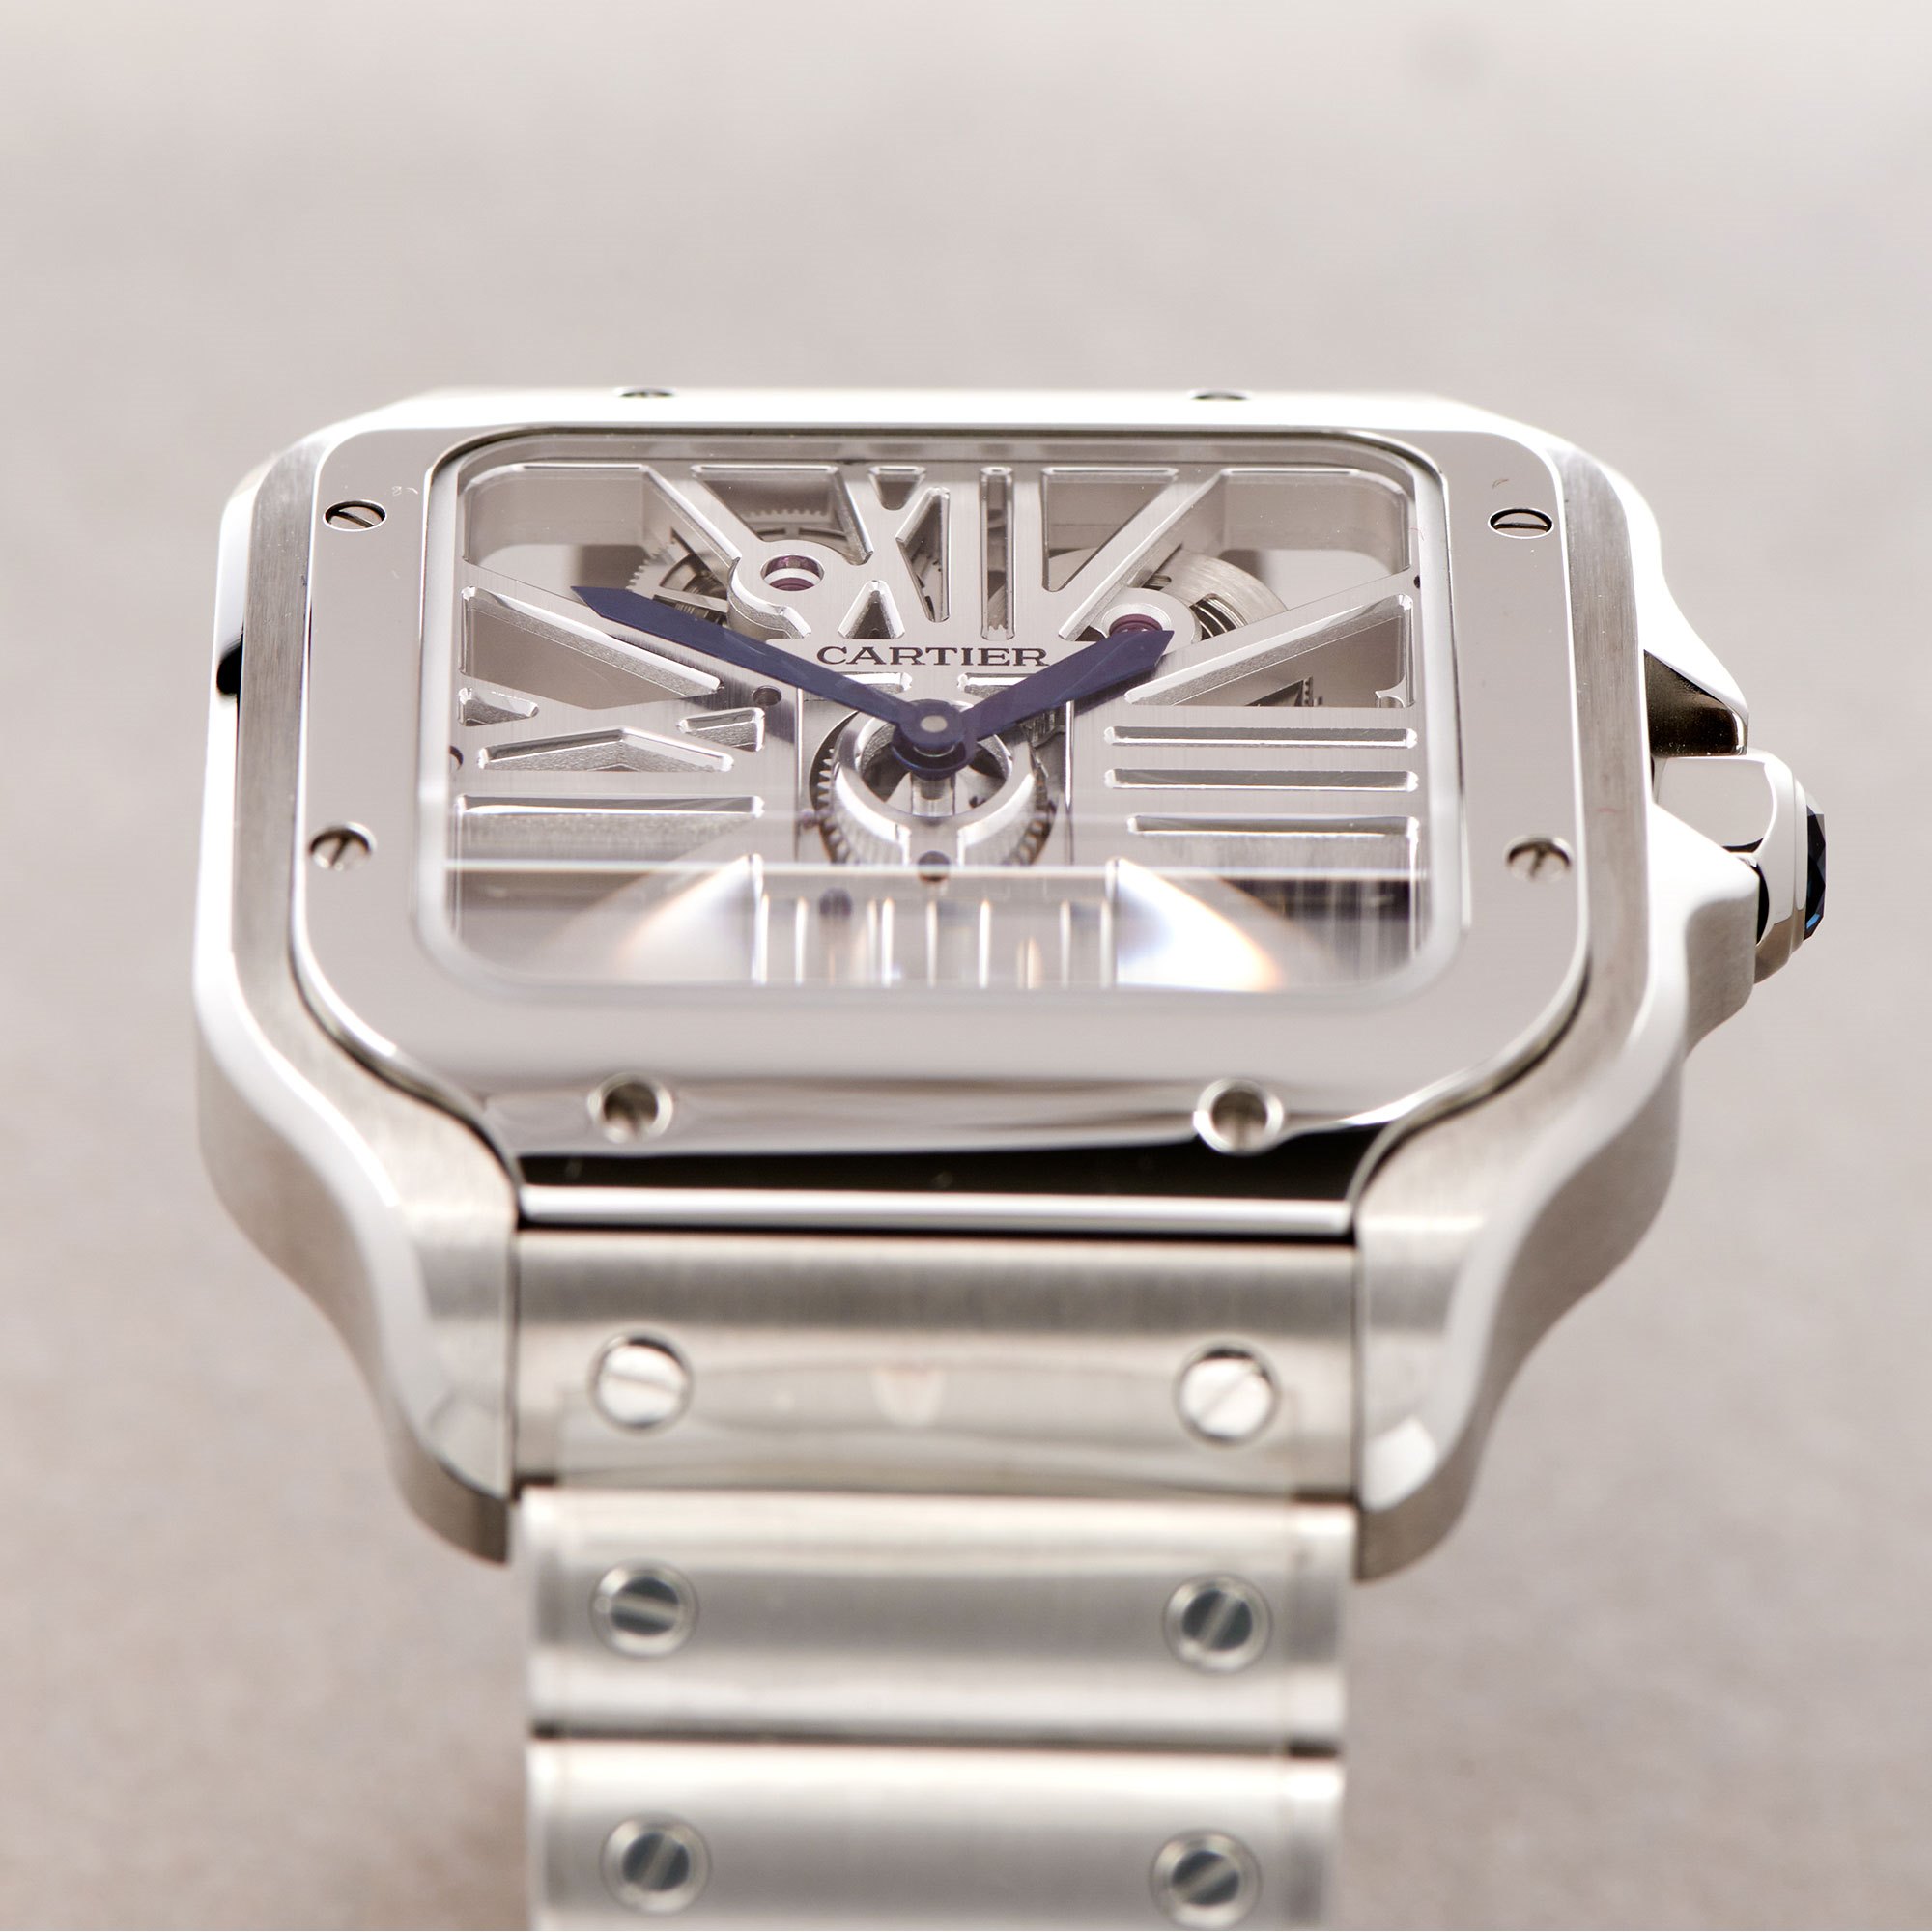 Cartier Santos Roestvrij Staal WHSA0015 or 4109